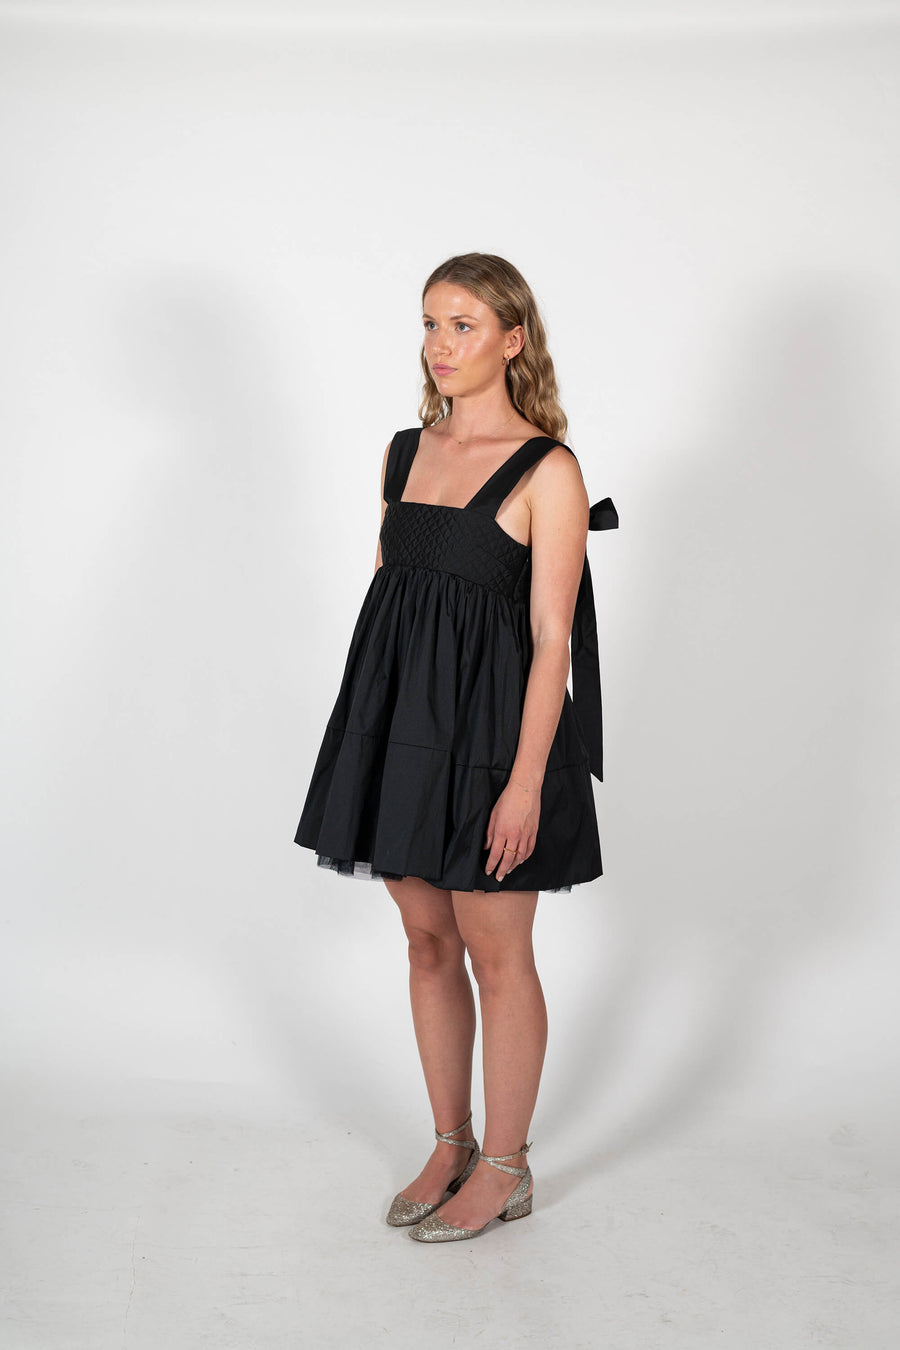 The Dolly Mini Dress in black taffeta with bow straps and quilted bodice by Australian brand House of Campbell.